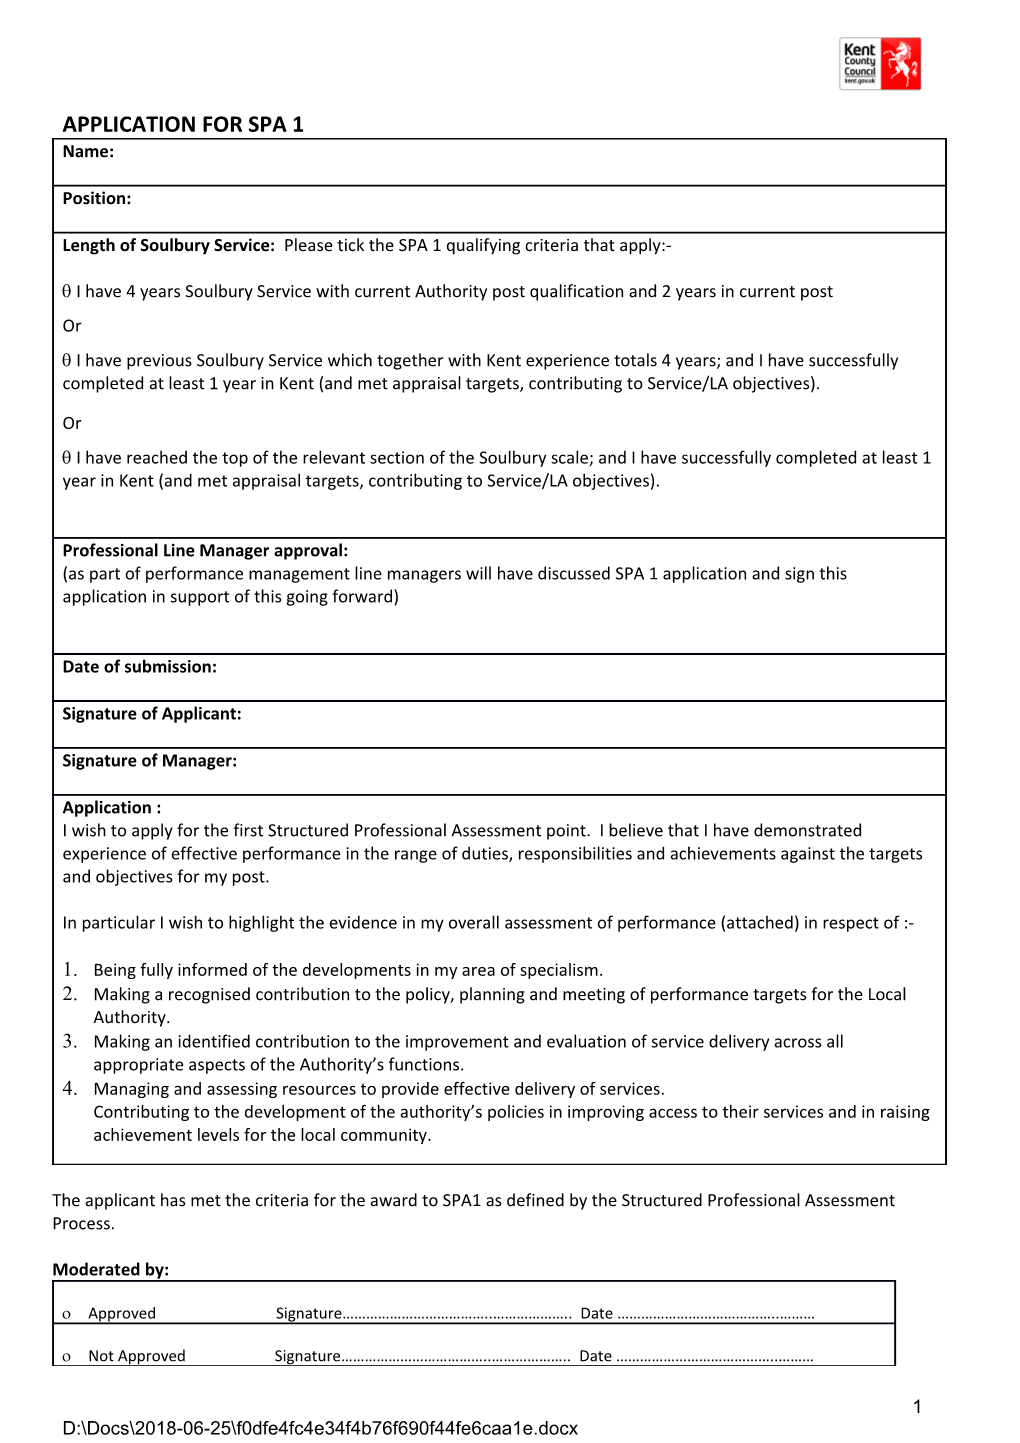 Application for Spa 1